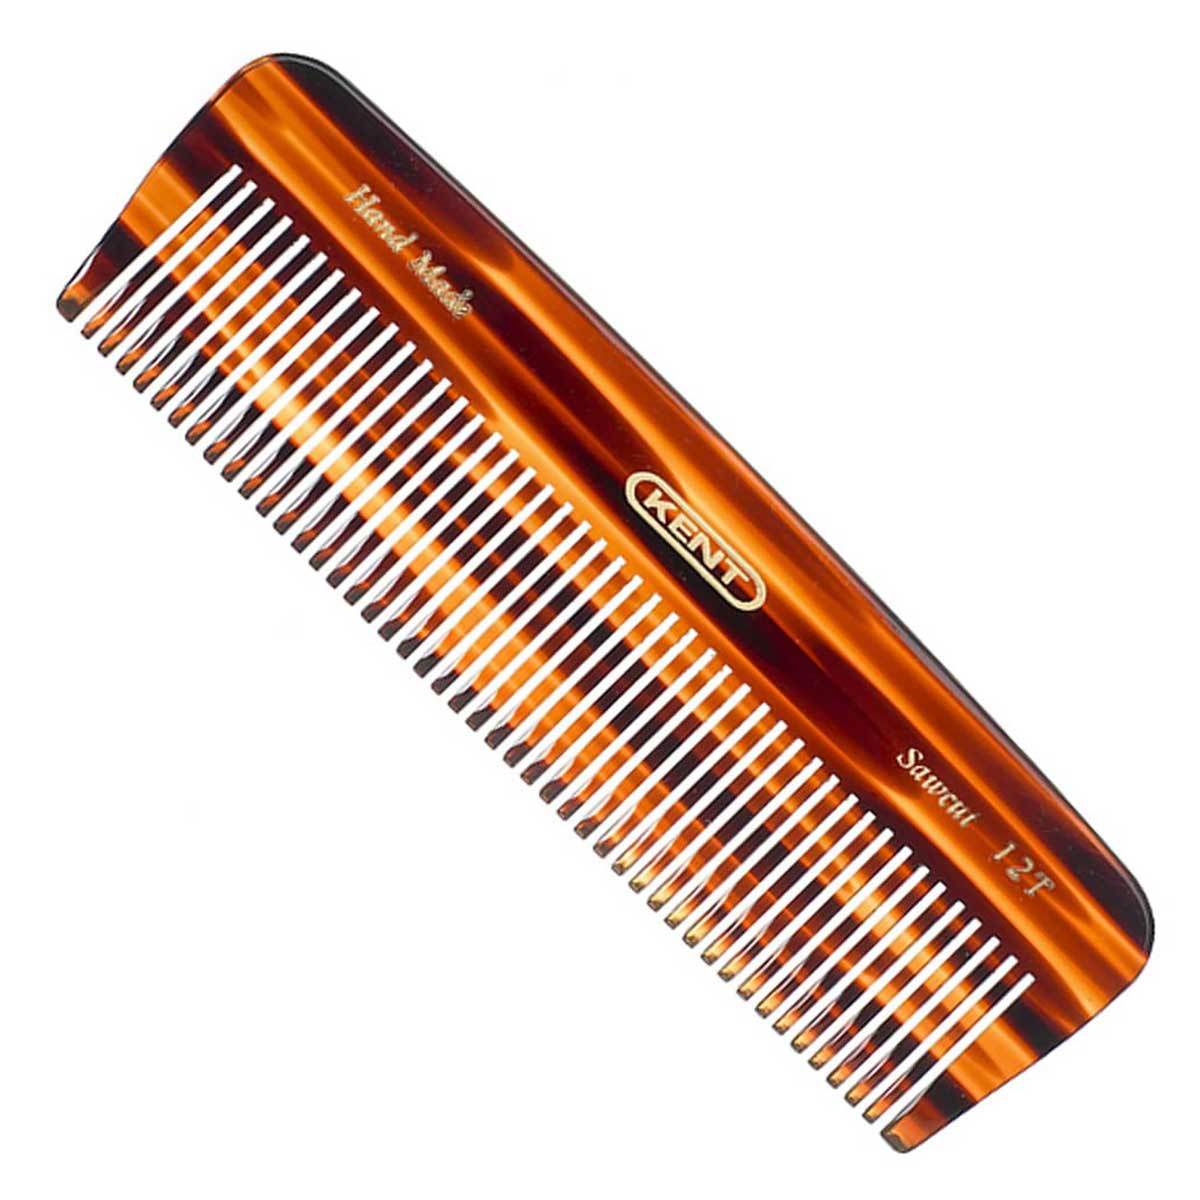 Primary image of 140mm Pocket Comb for Thick Hair